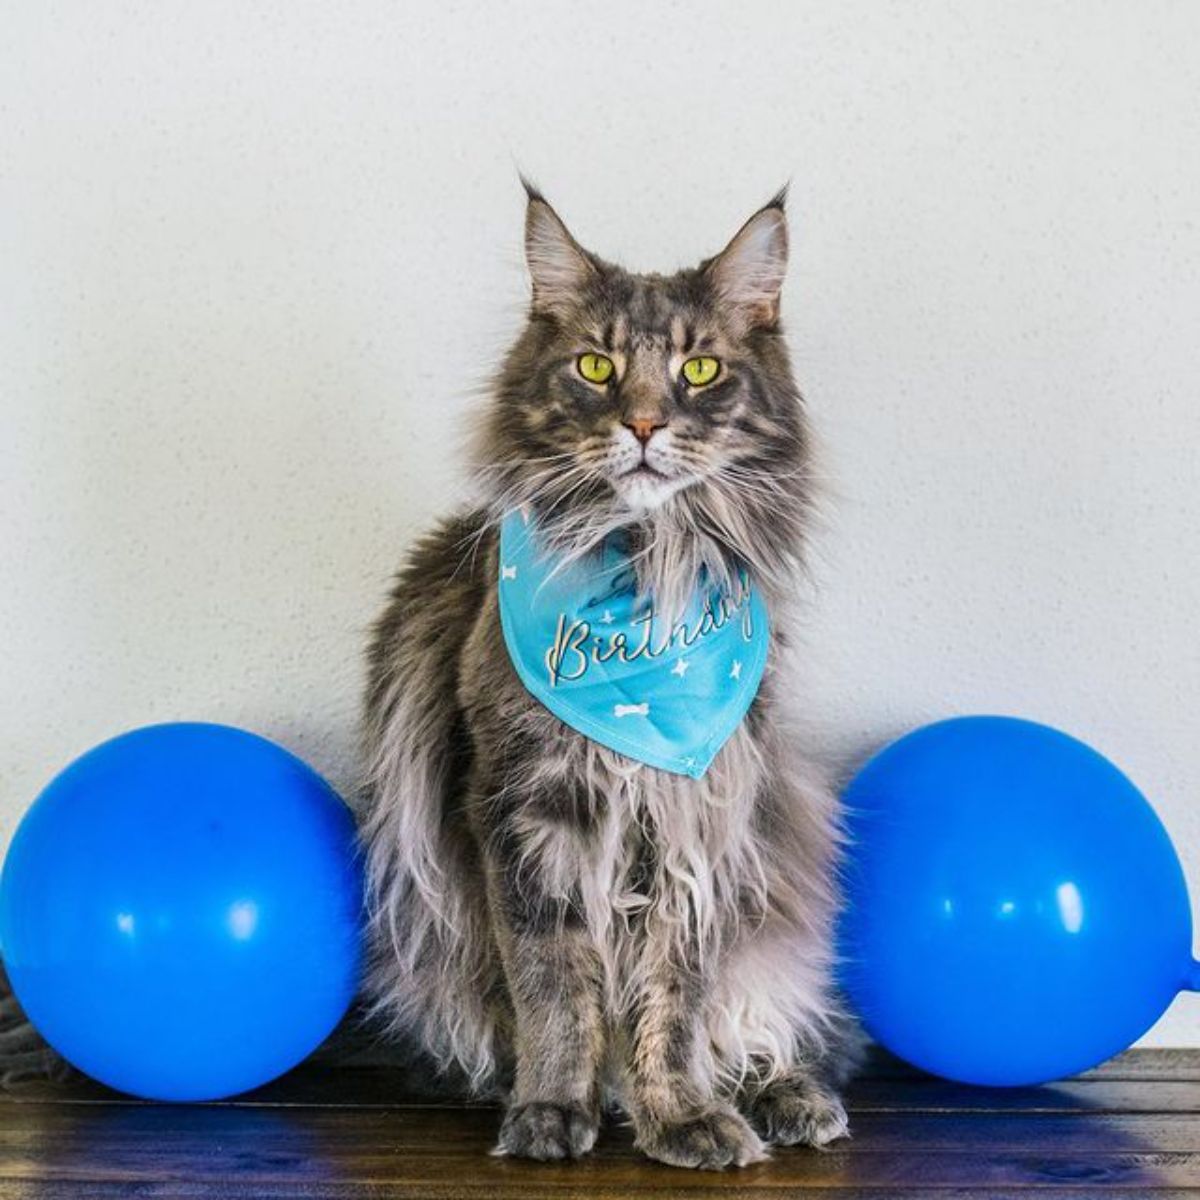 A big fluffy maine coon with a scarf sitting between two blue balloons.